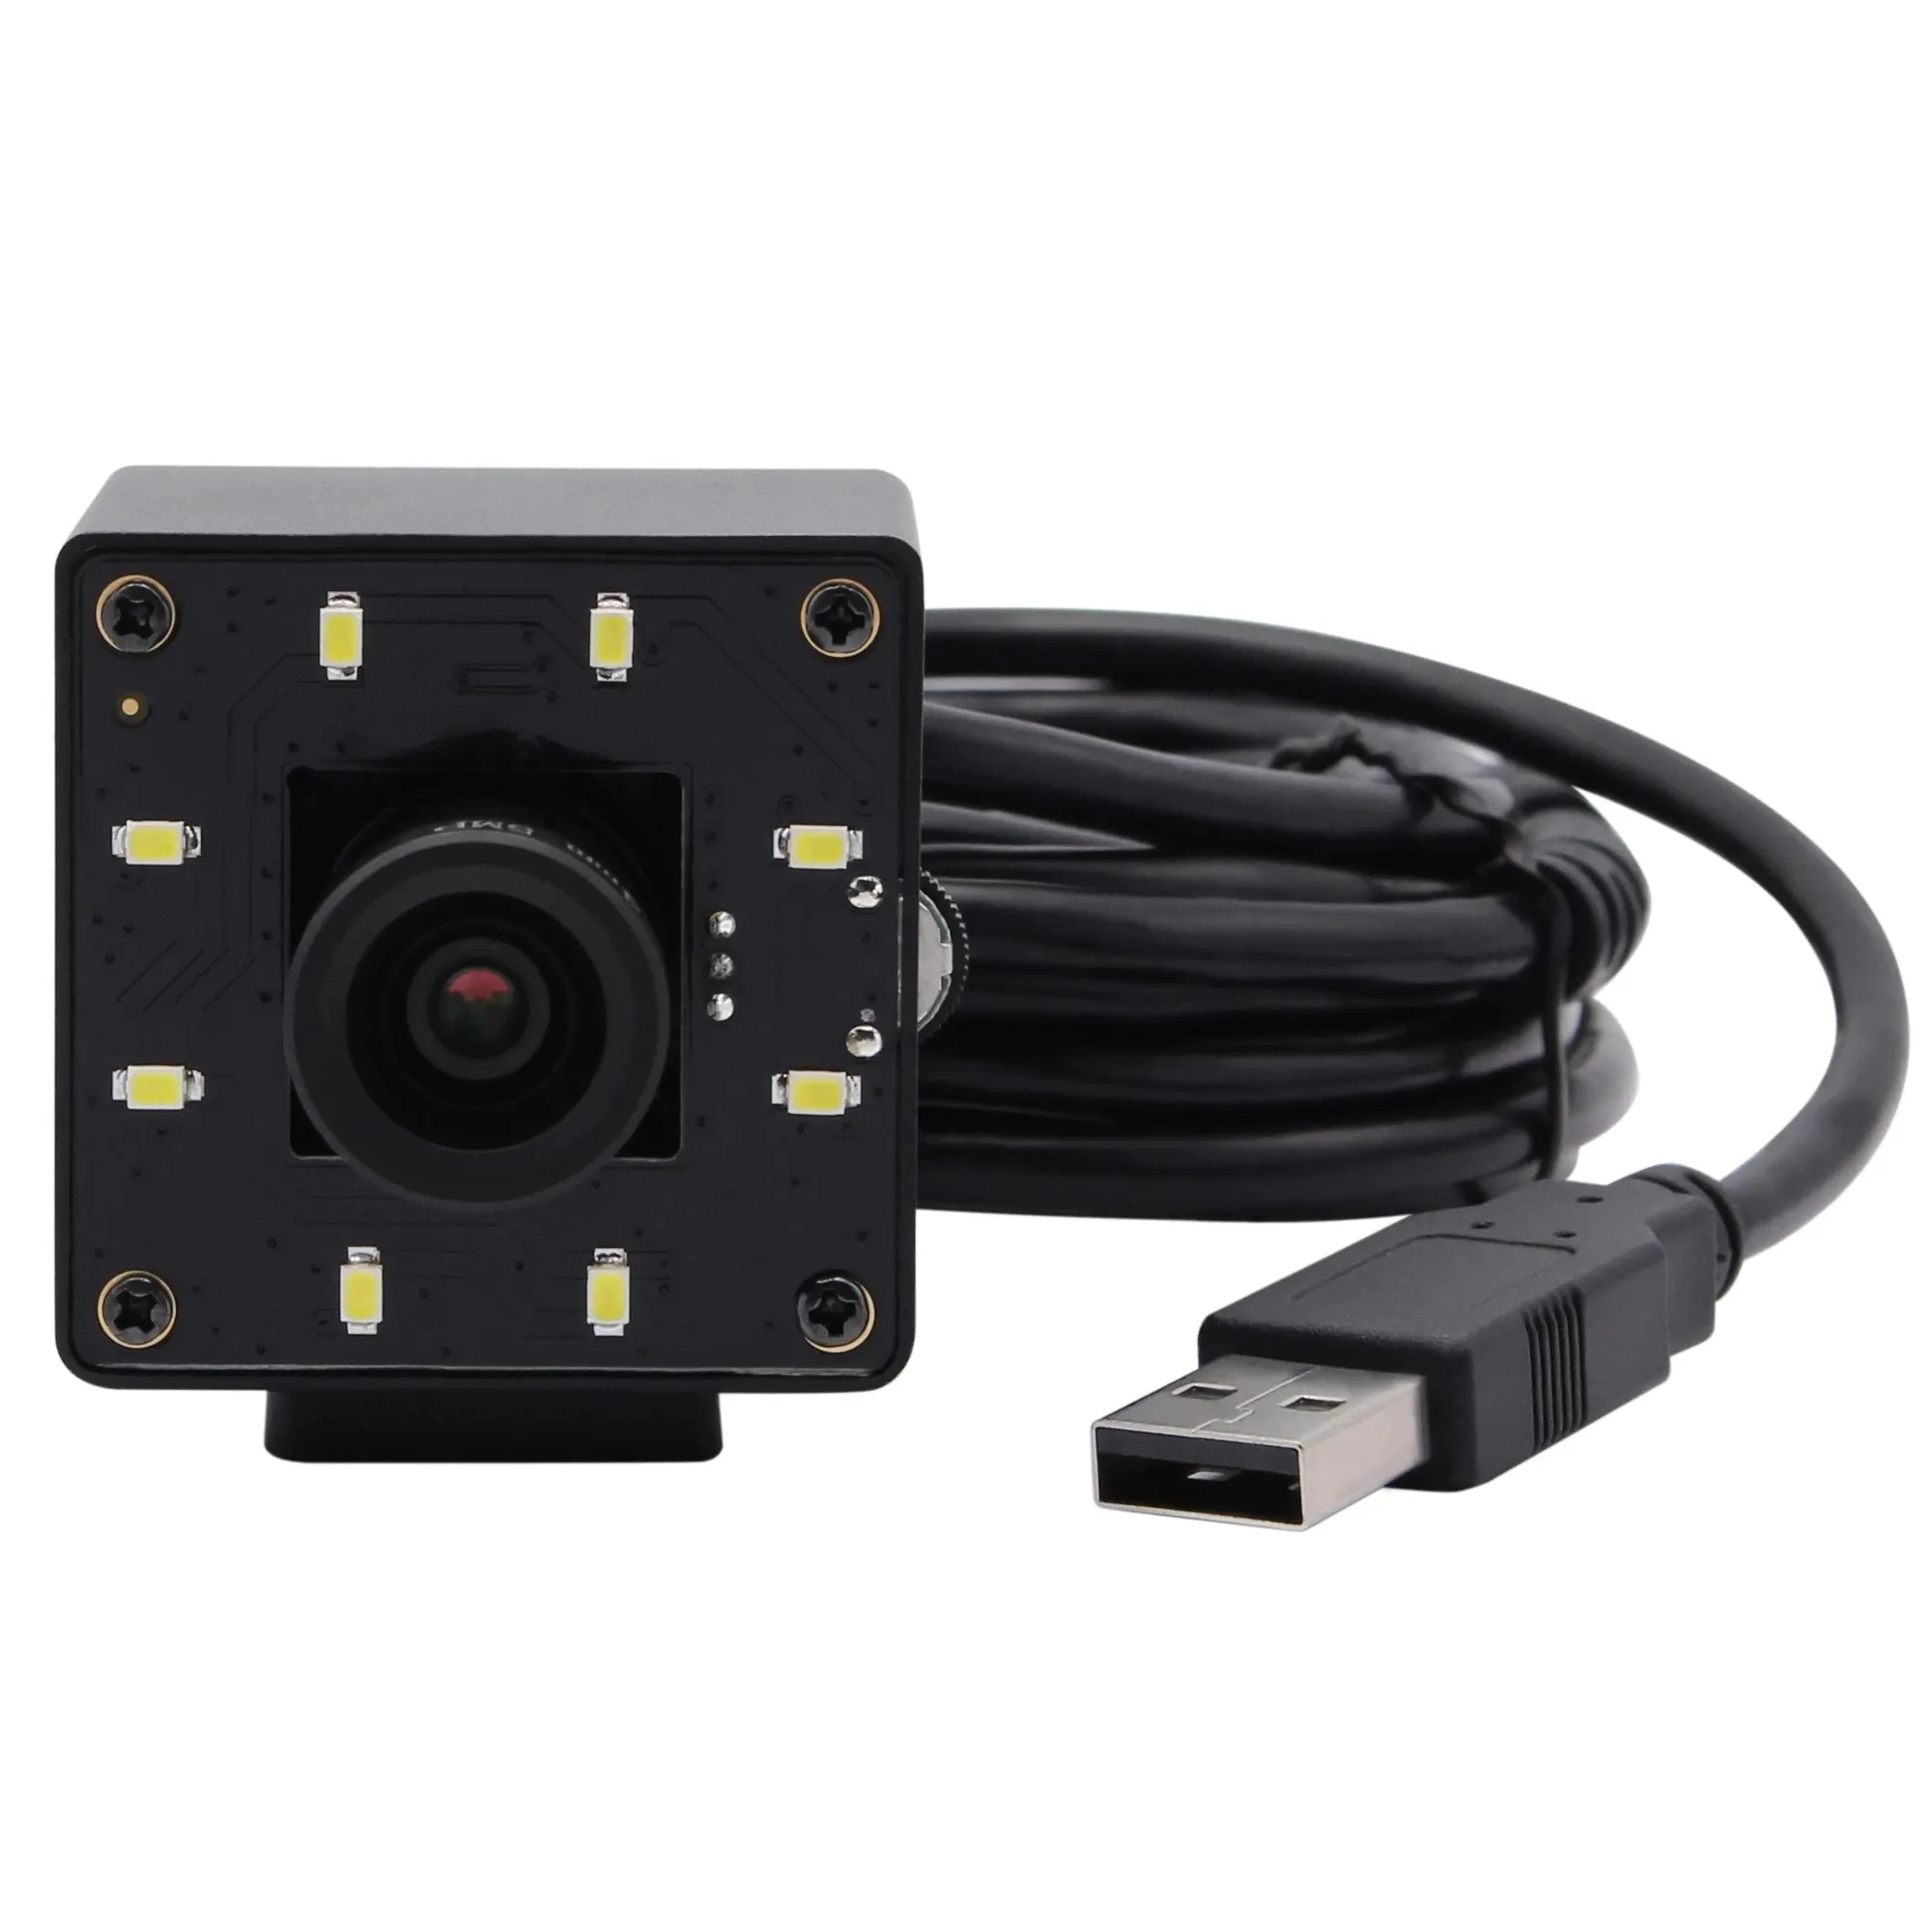 ELP 4K Camera 3840x2160 MJPEG 30fps IMX317 Security Mini USB Video Web Cam USB Camera with White LEDS for Day/Night Vision